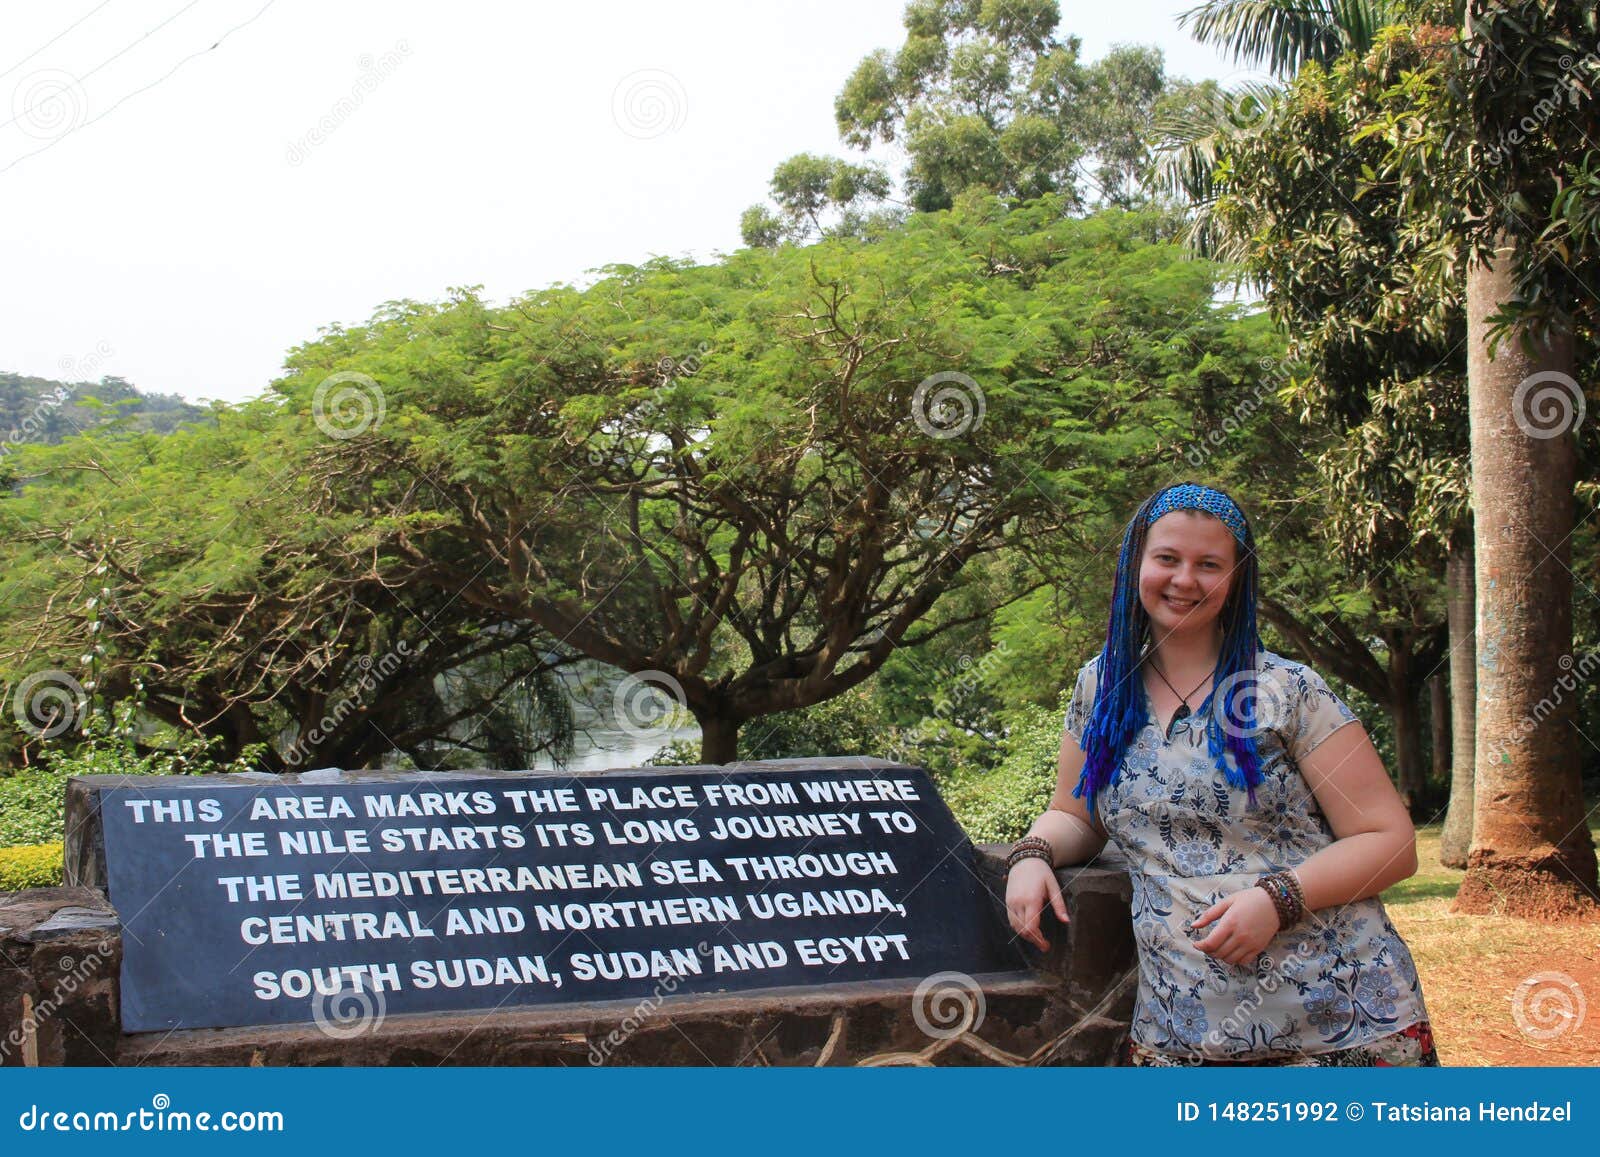 a monument dedicated to the place where the nile river originates from lake victoria.